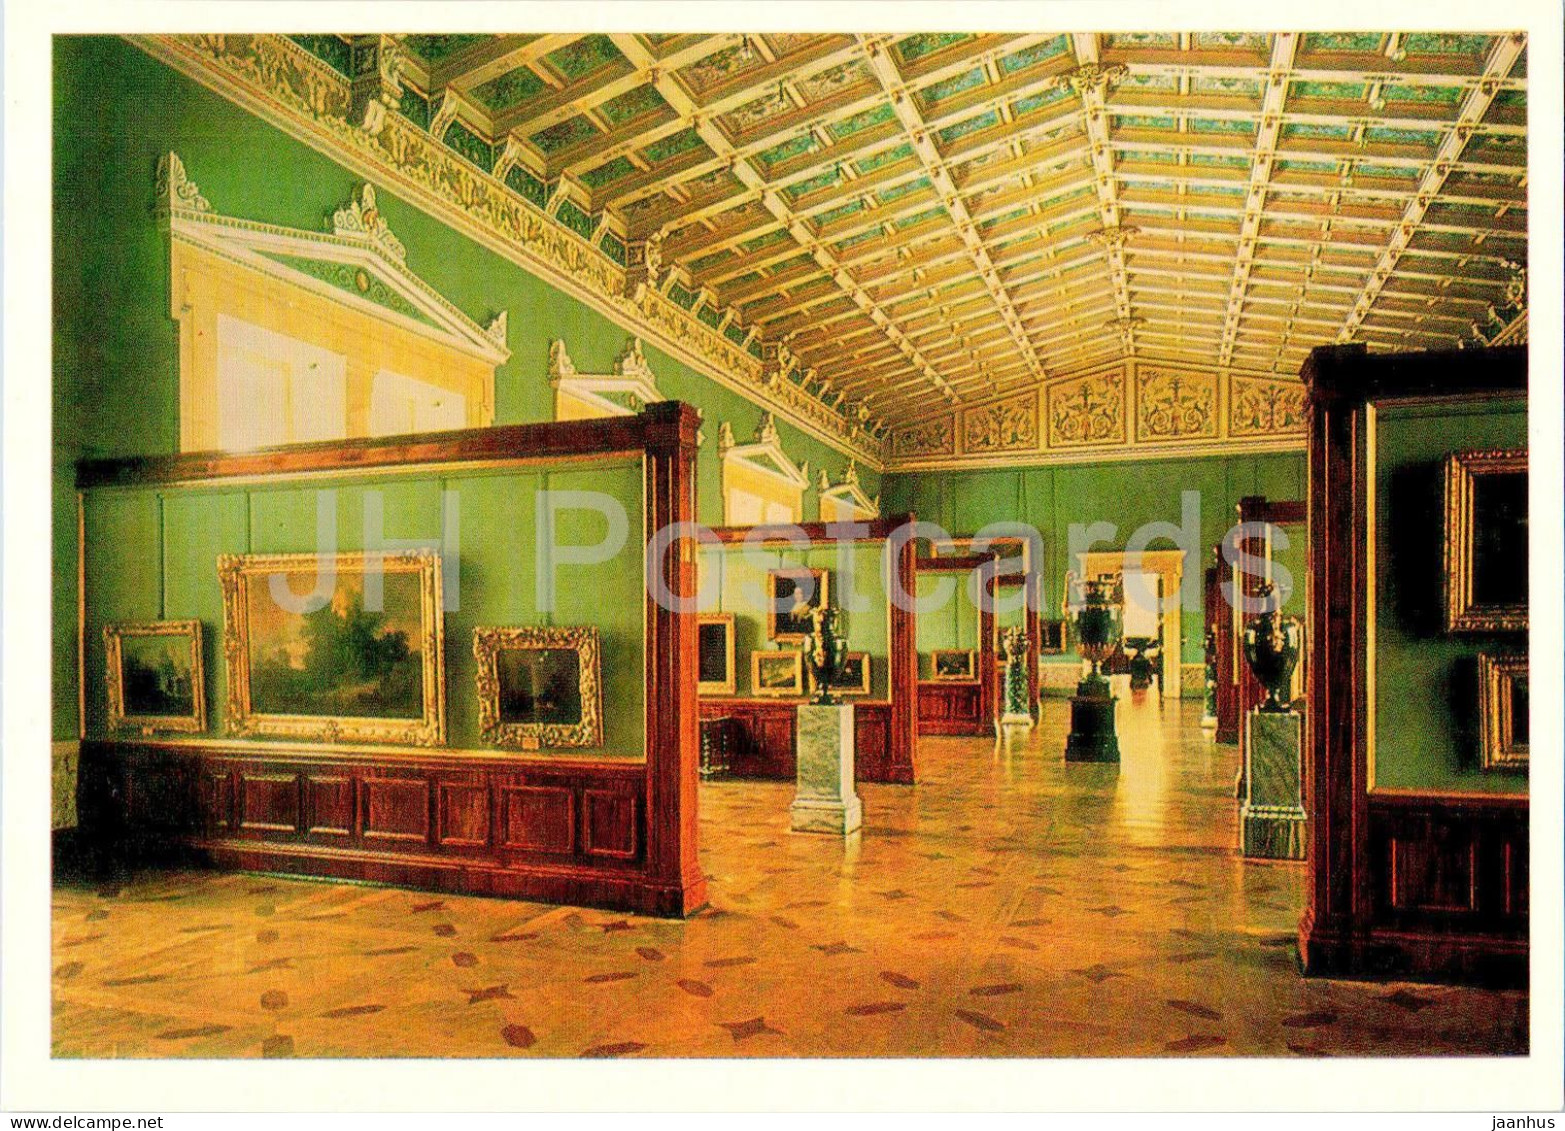 Leningrad - St Petersburg - The Tent Hall In The New Hermitage - Museum - 1984 - Russia USSR - Unused - Russland